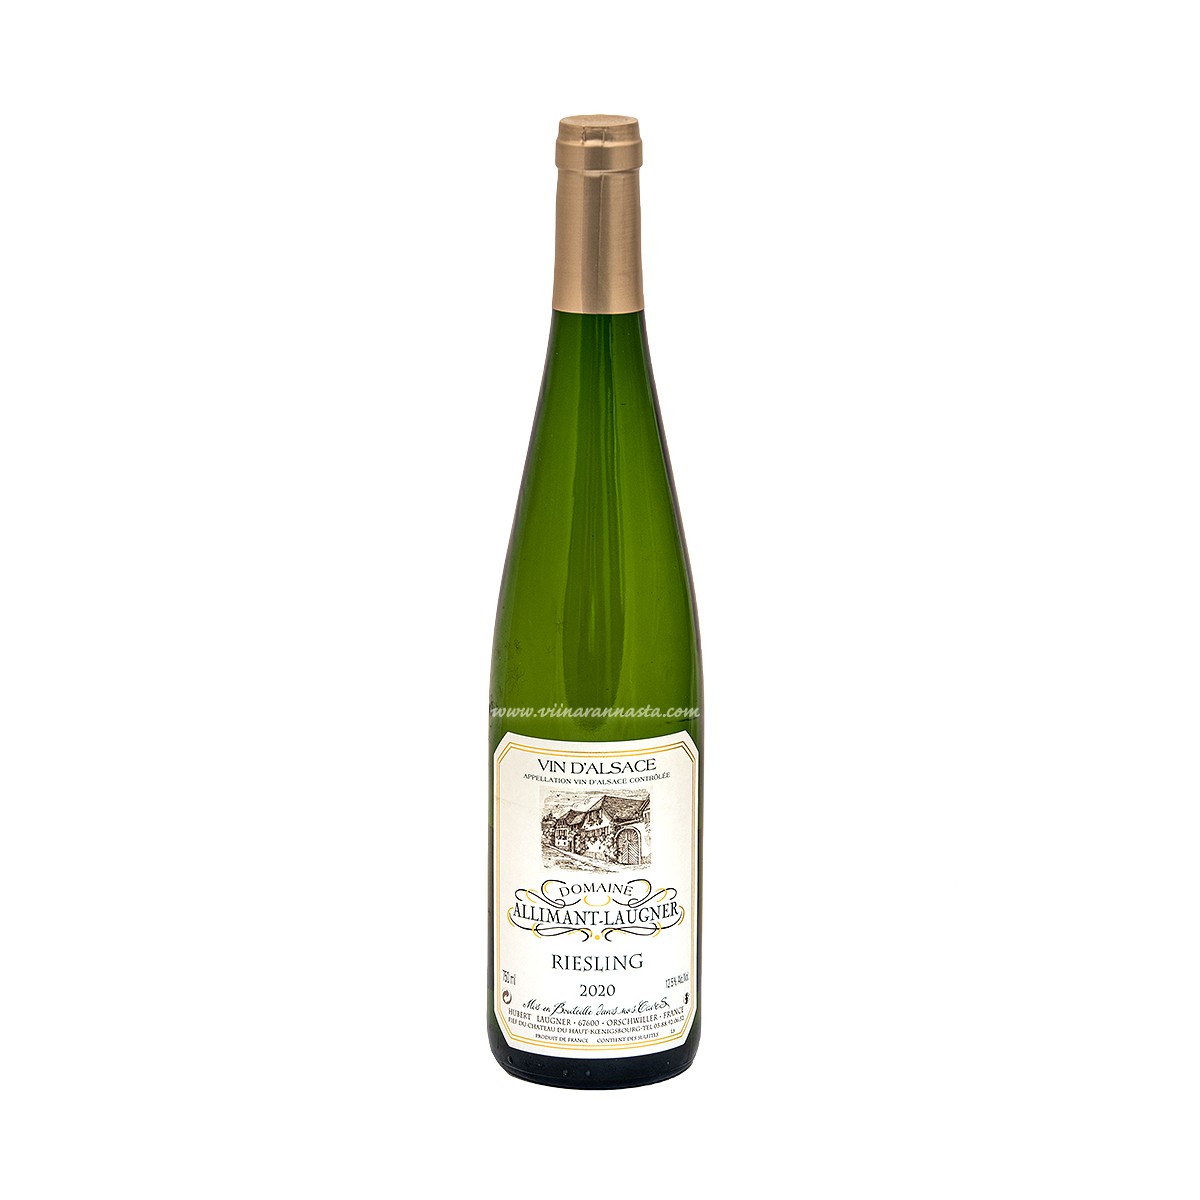 Allimant Laugner Riesling 12,5% 75cl